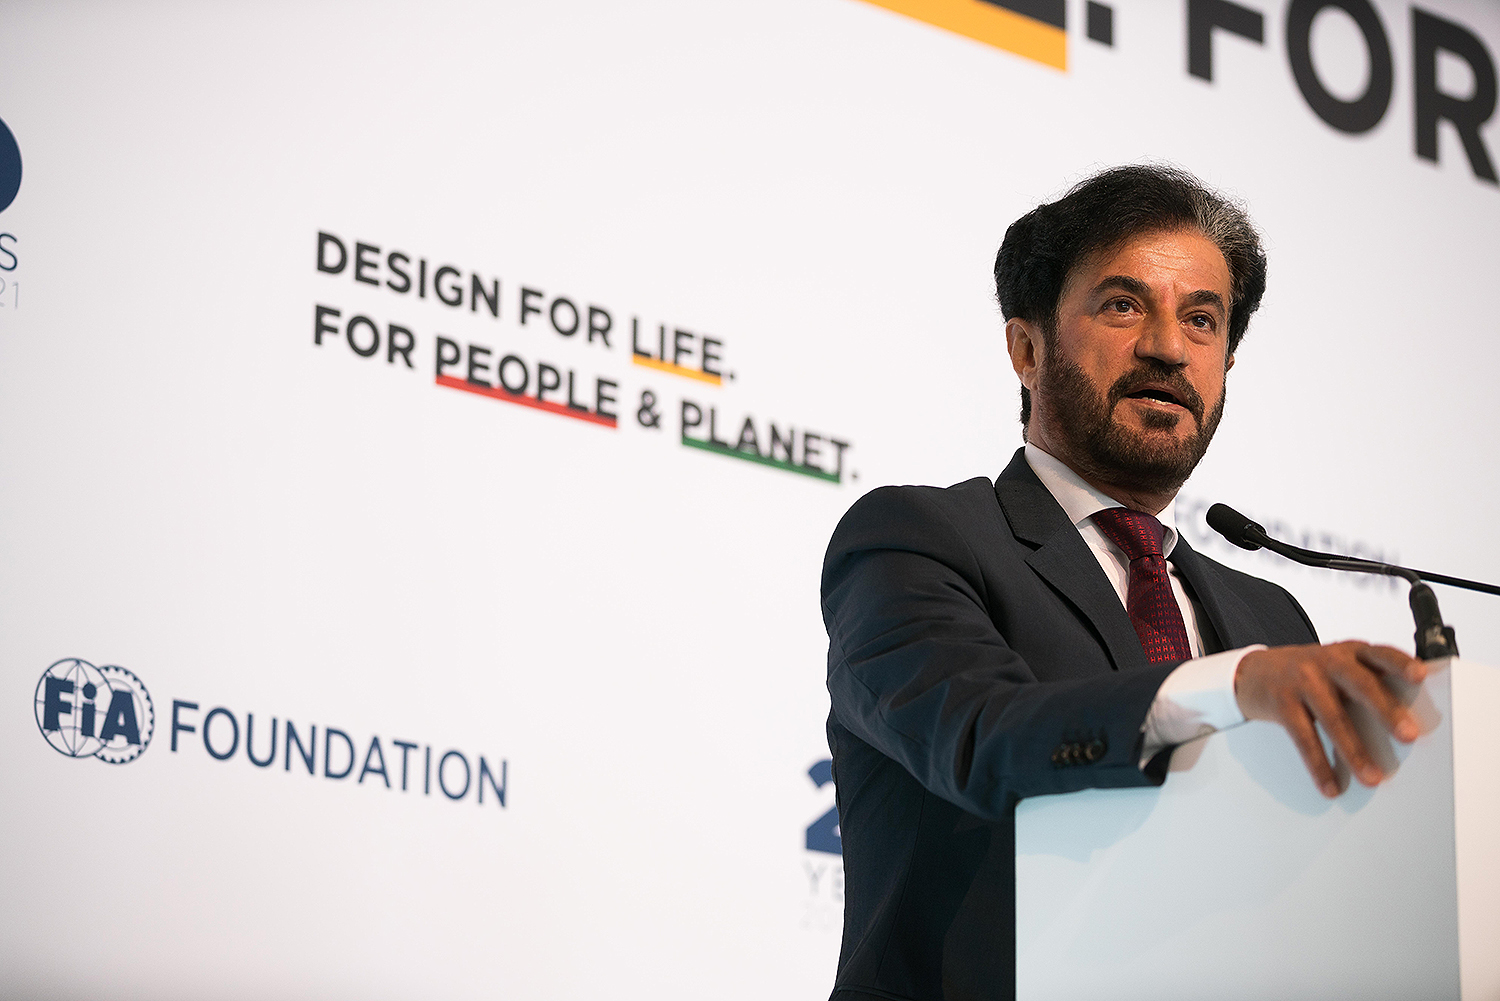 Mohammed Ben Sulayem, President of the FIA